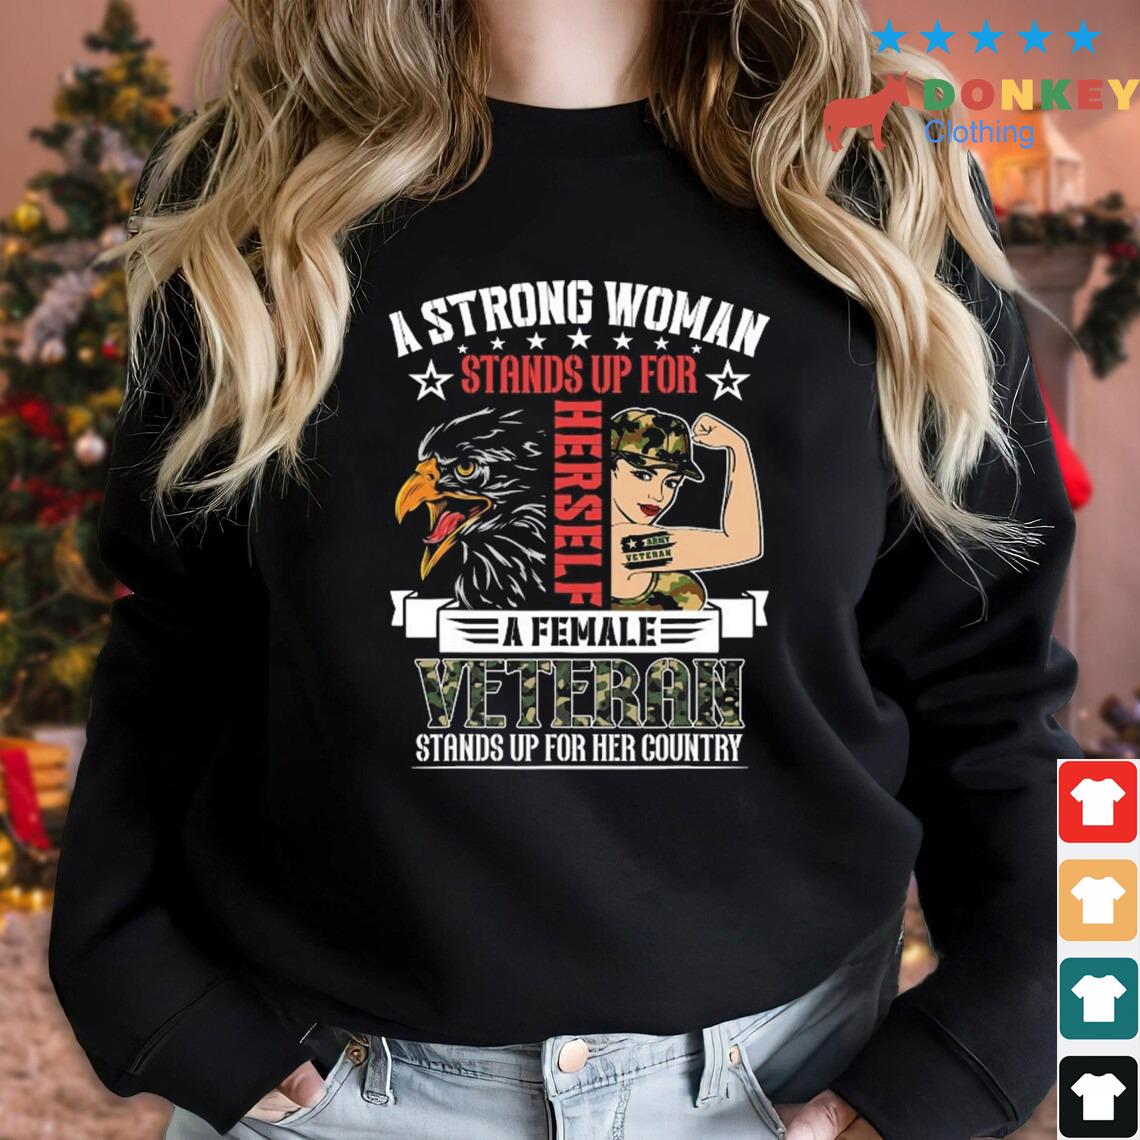 A Strong Woman Female Veteran Stands Up For Her Country Shirt